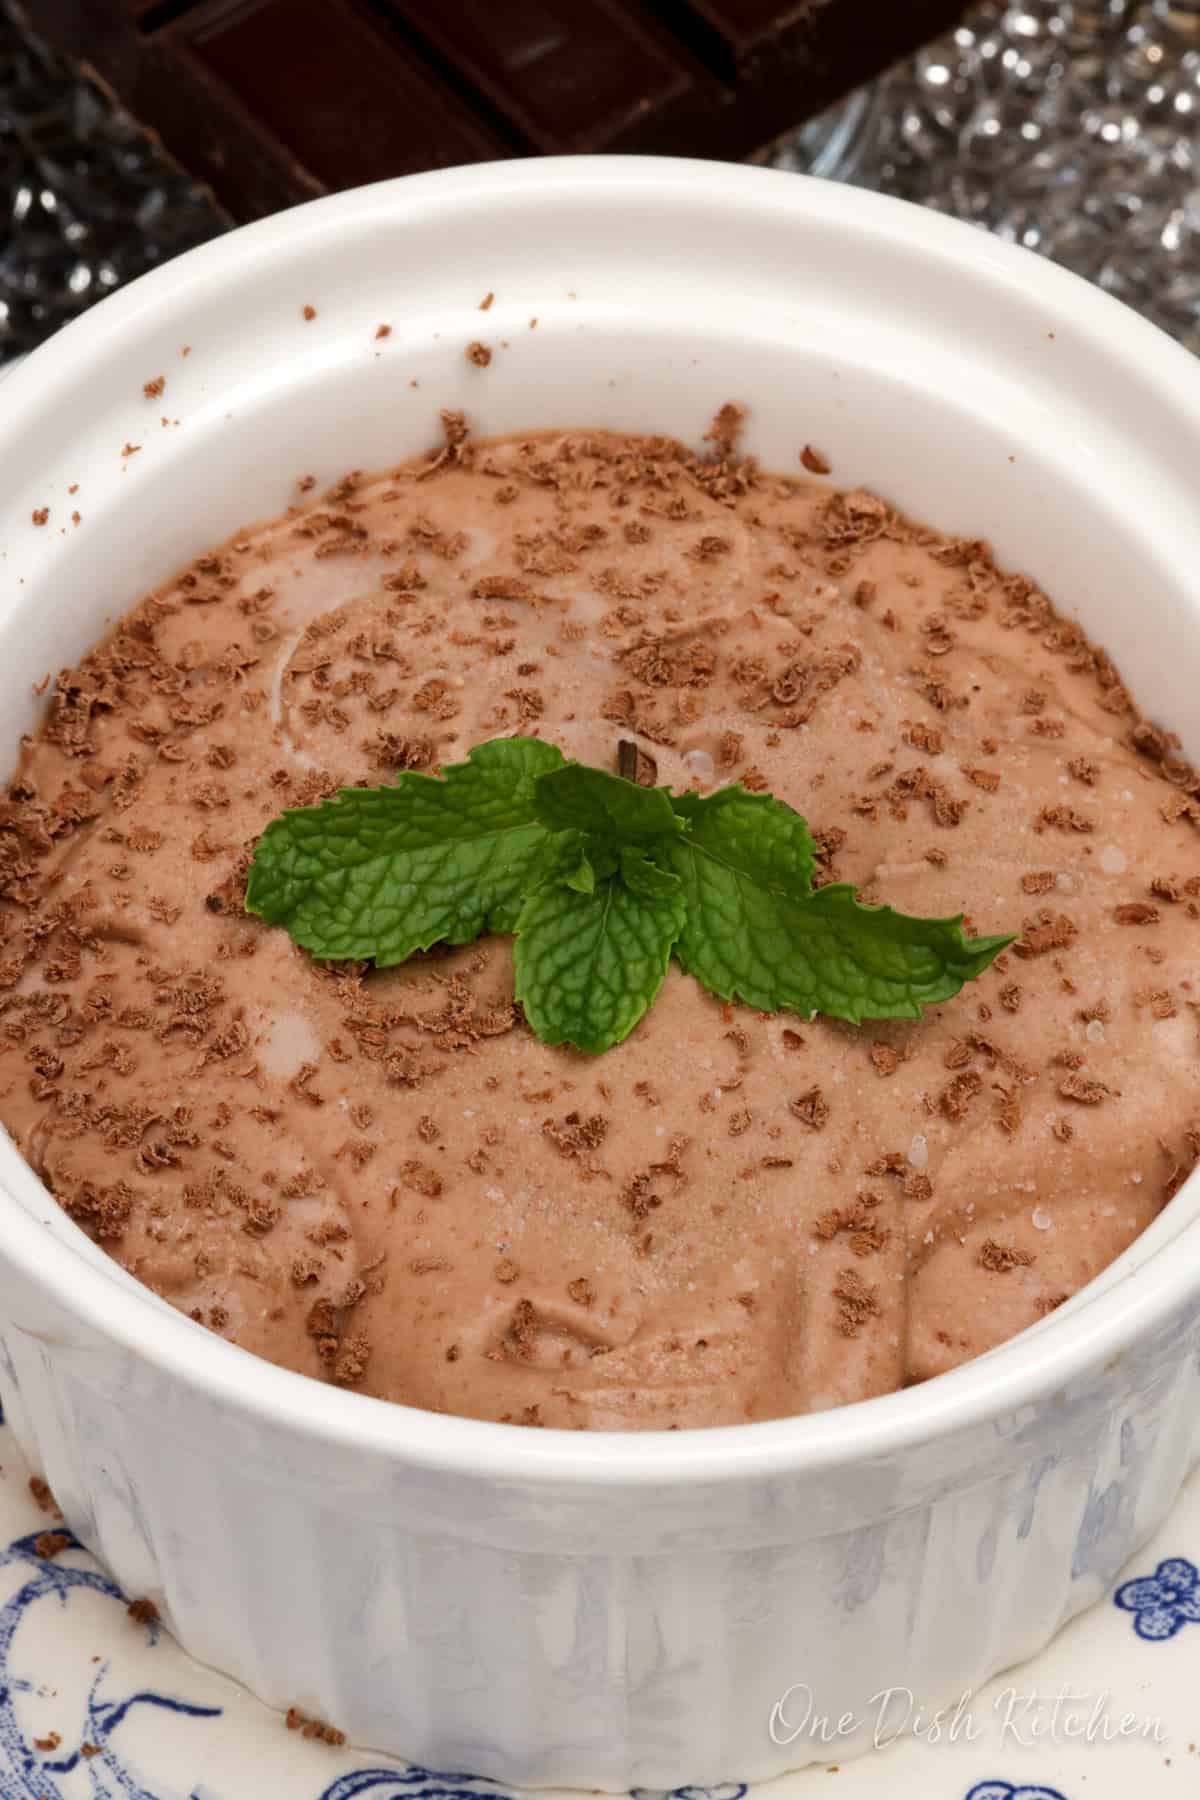 a white ramekin filled with homemade chocolate ice cream topped with a sprig of fresh mint.